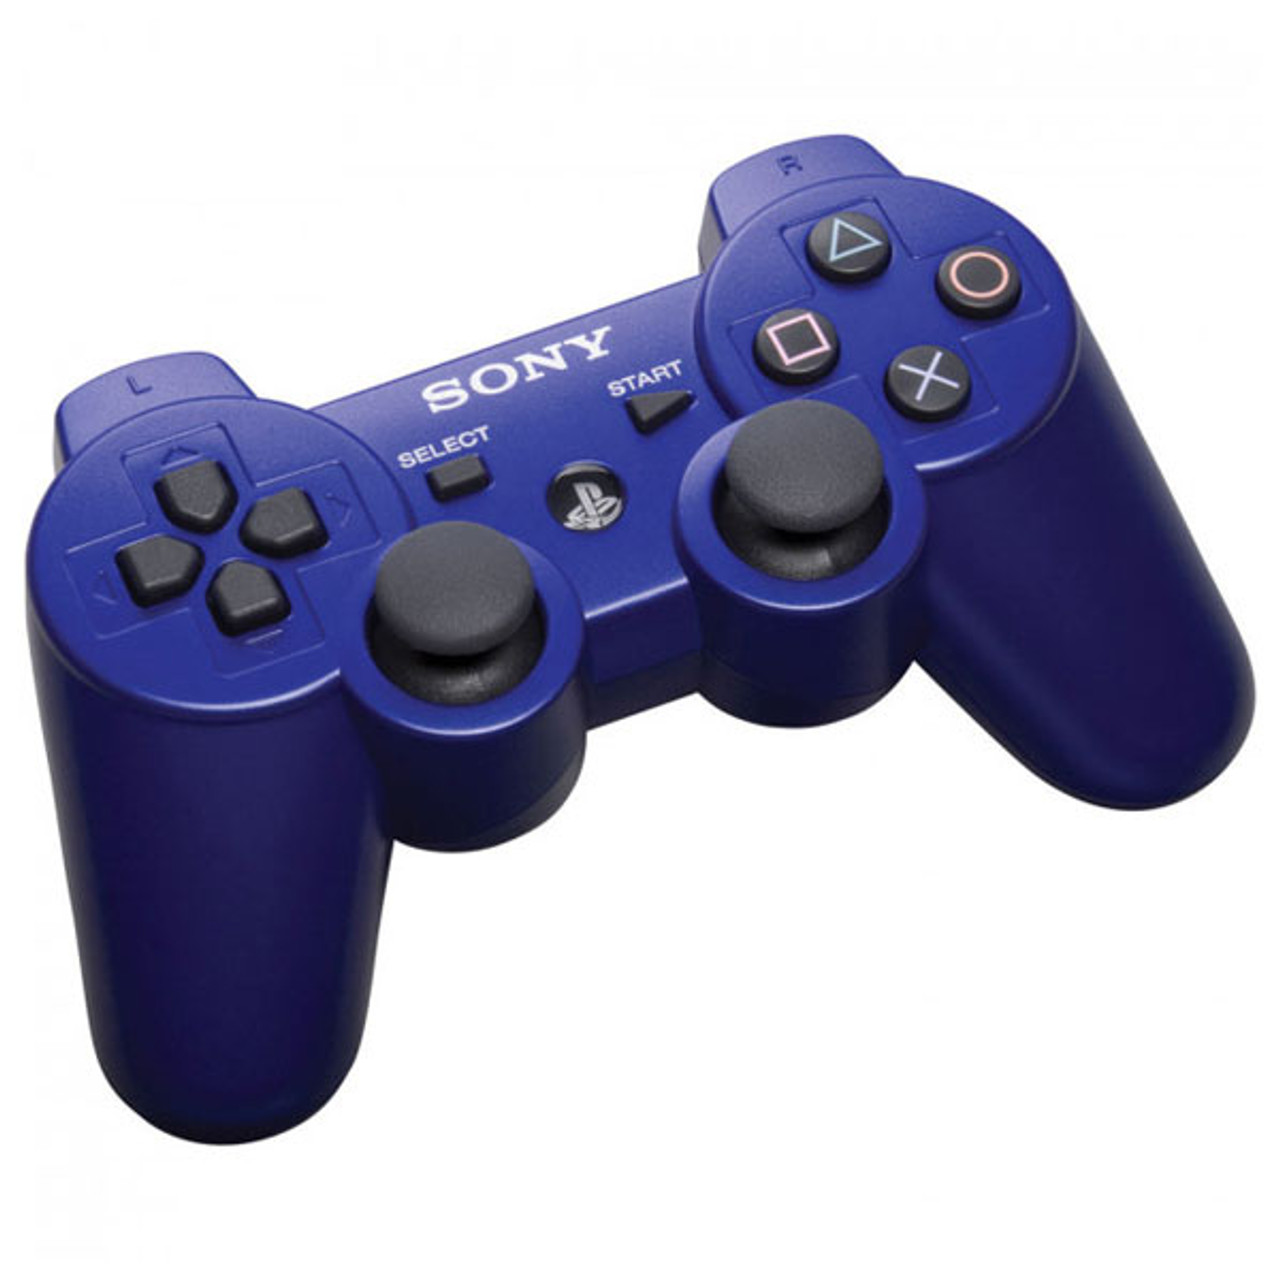 Ps3 блютуз. Sony ps3 Controller Dualshock. Геймпад Sony Dualshock ps3 Controller Wireless. Sony Dualshock 3. Геймпад Sony Dualshock 3.